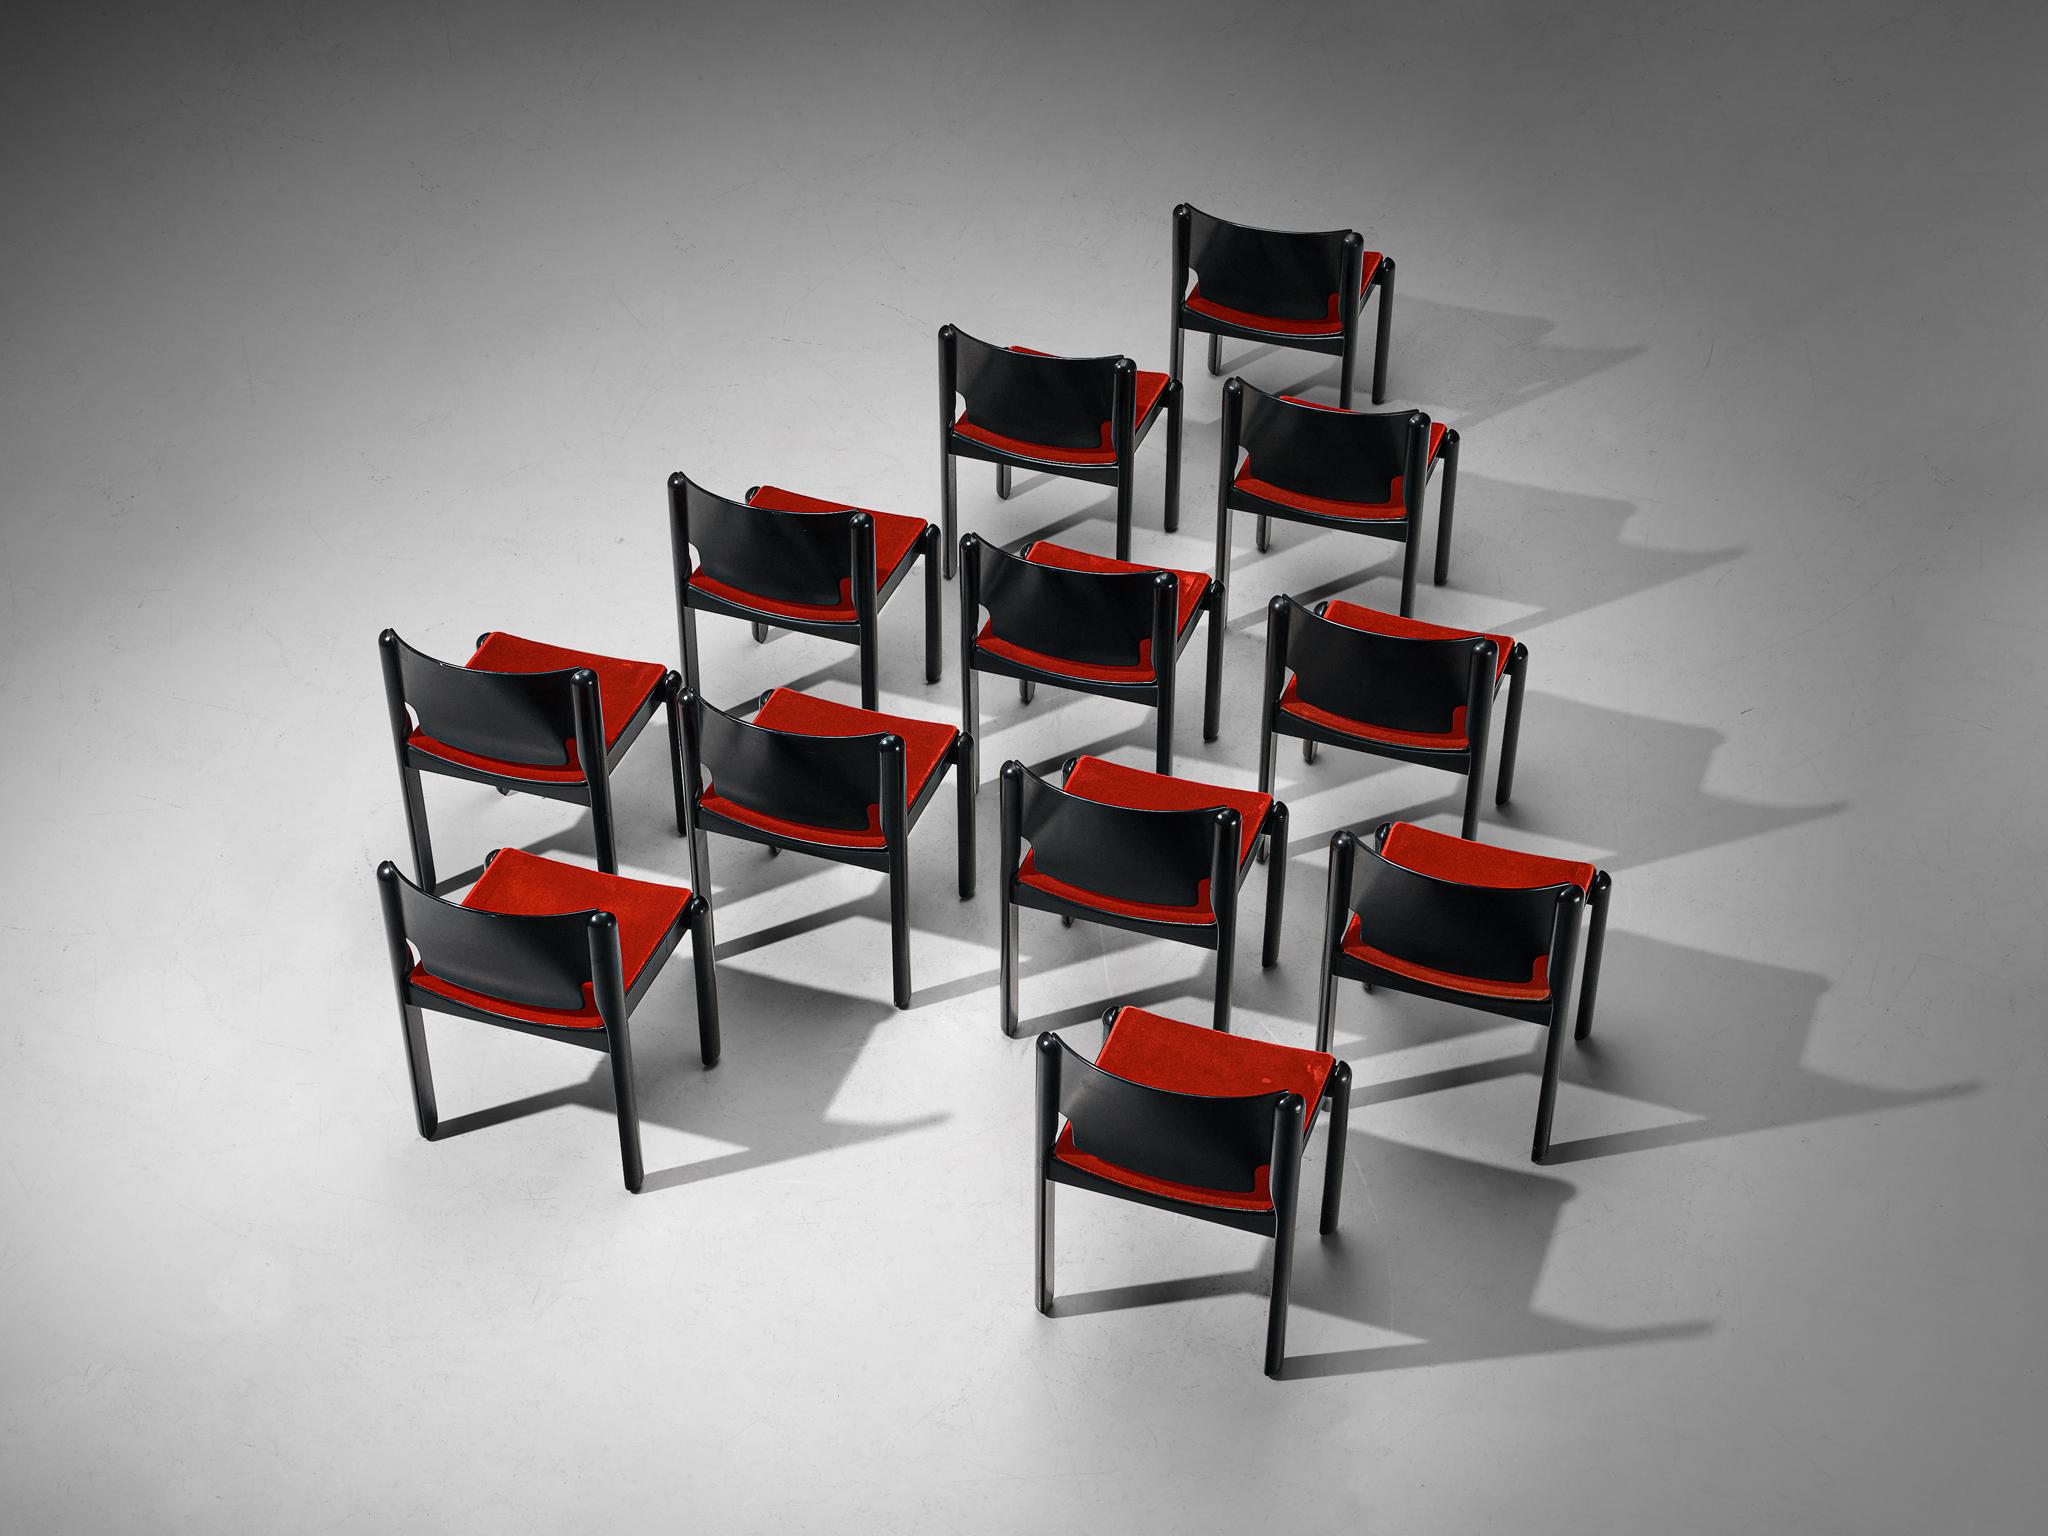 Vico Magistretti for Cassina, set of twelve chairs model '122', curved plywood, red velvet, Italy, 1967

This Italian set features a remarkable sculpted back that is beautifully curved on both sides, resulting in an expansion at the bottom. The